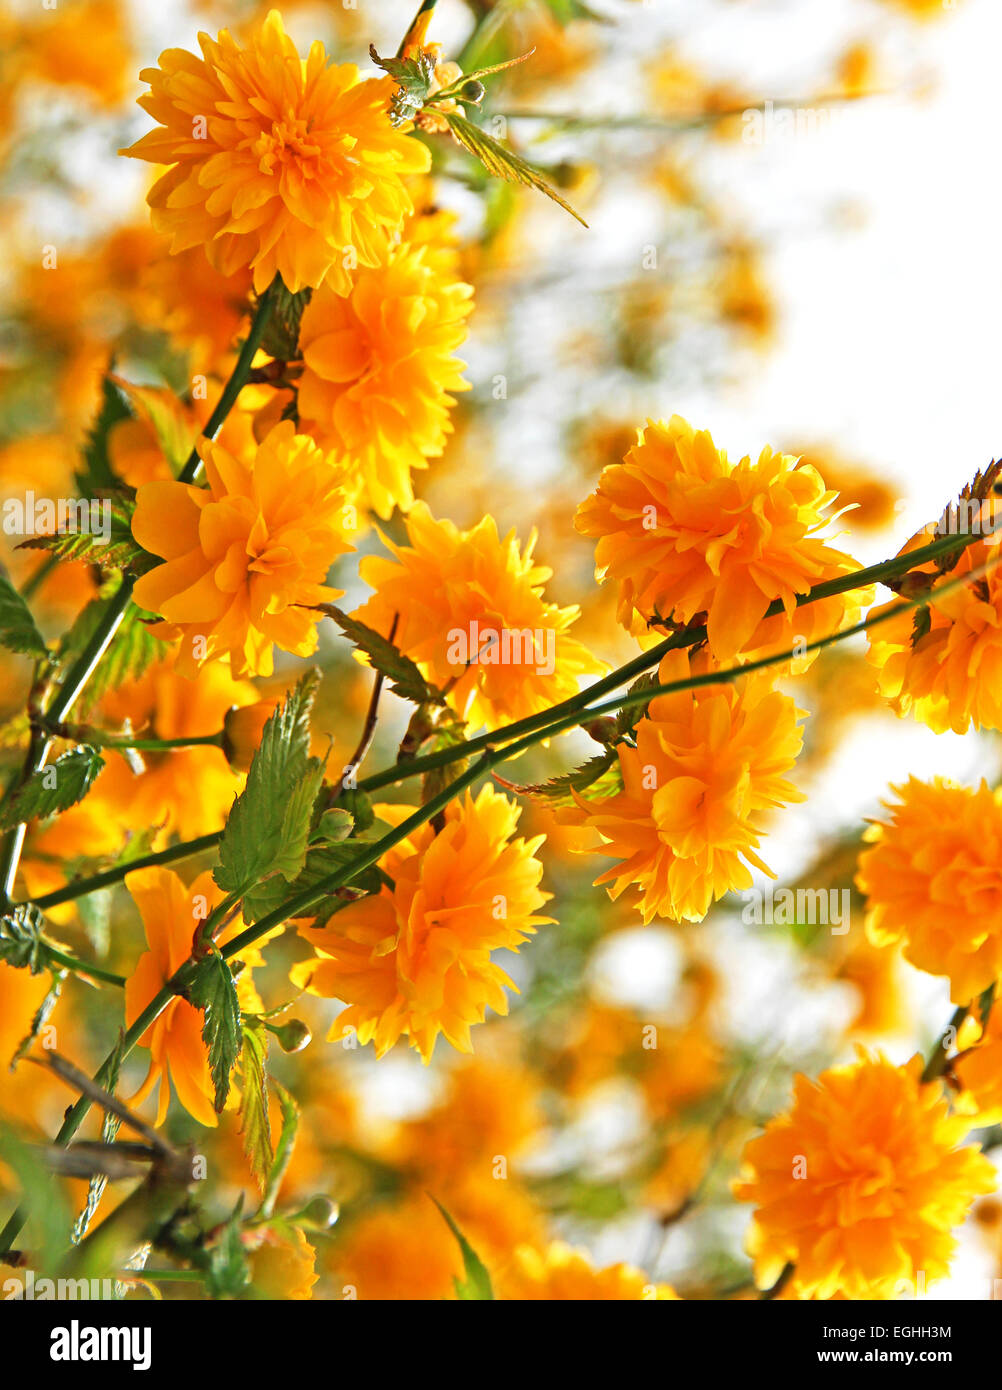 Incredible Compilation of Over 999 Yellow Flowers Images in Stunning ...